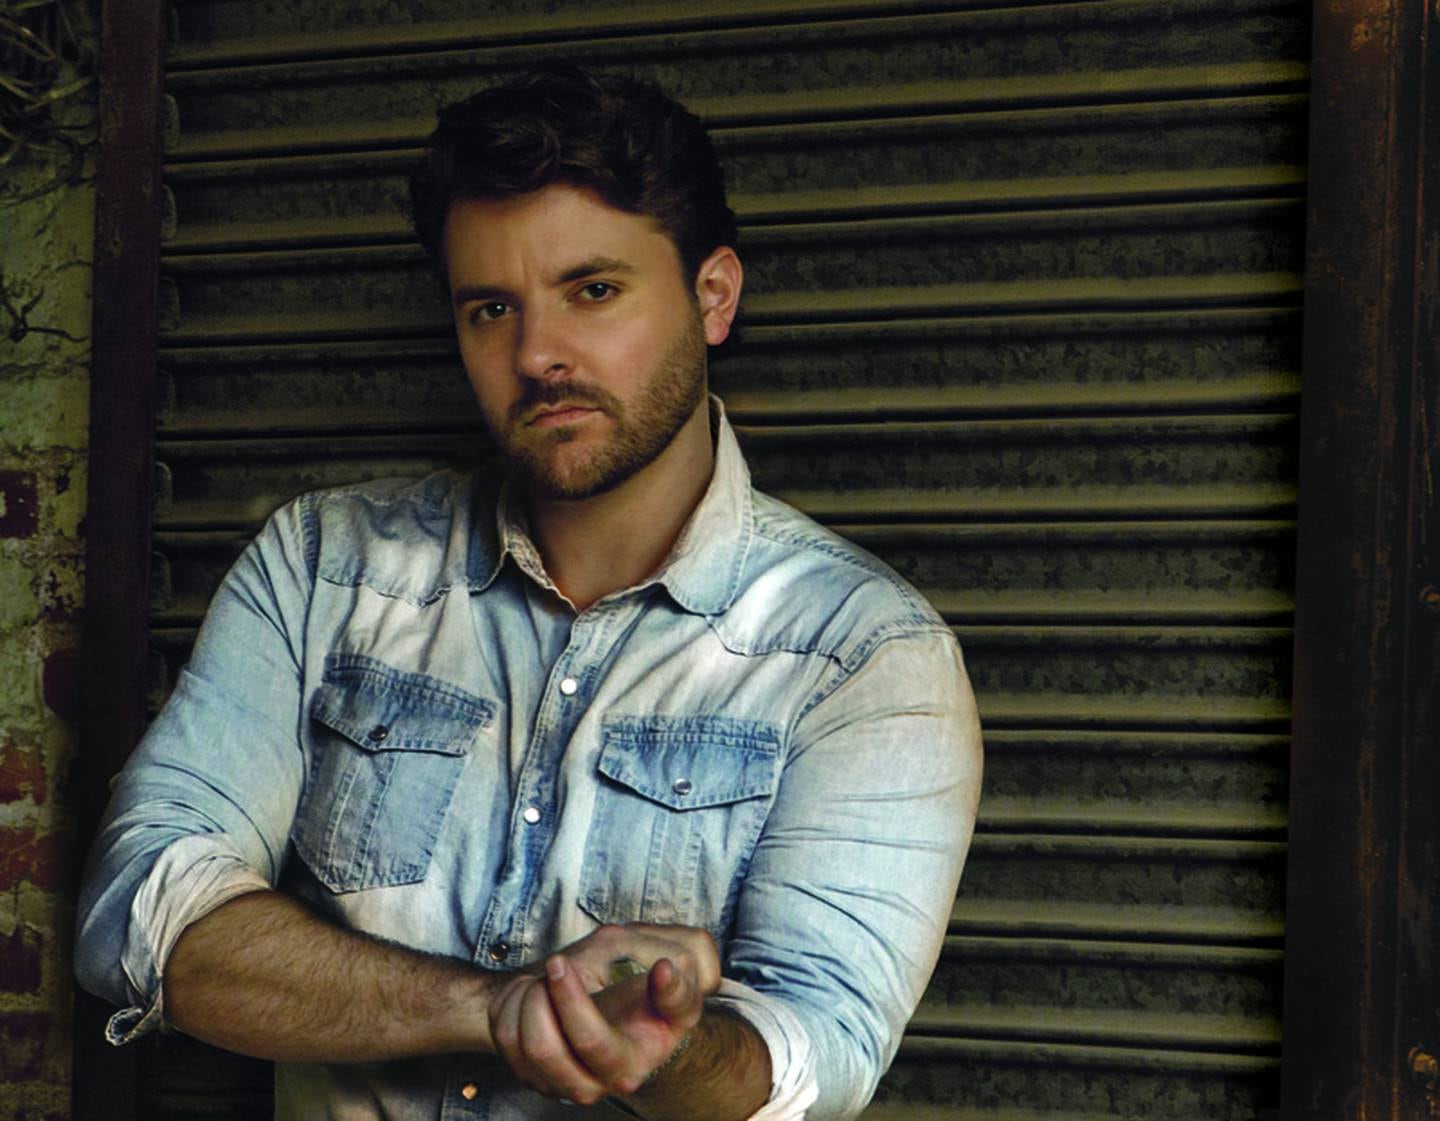 Country music singer Chris Young will headline the Let's Go Music Festival Saturday night performances at the Anne Arundel County Fairgrounds in Crownsville.